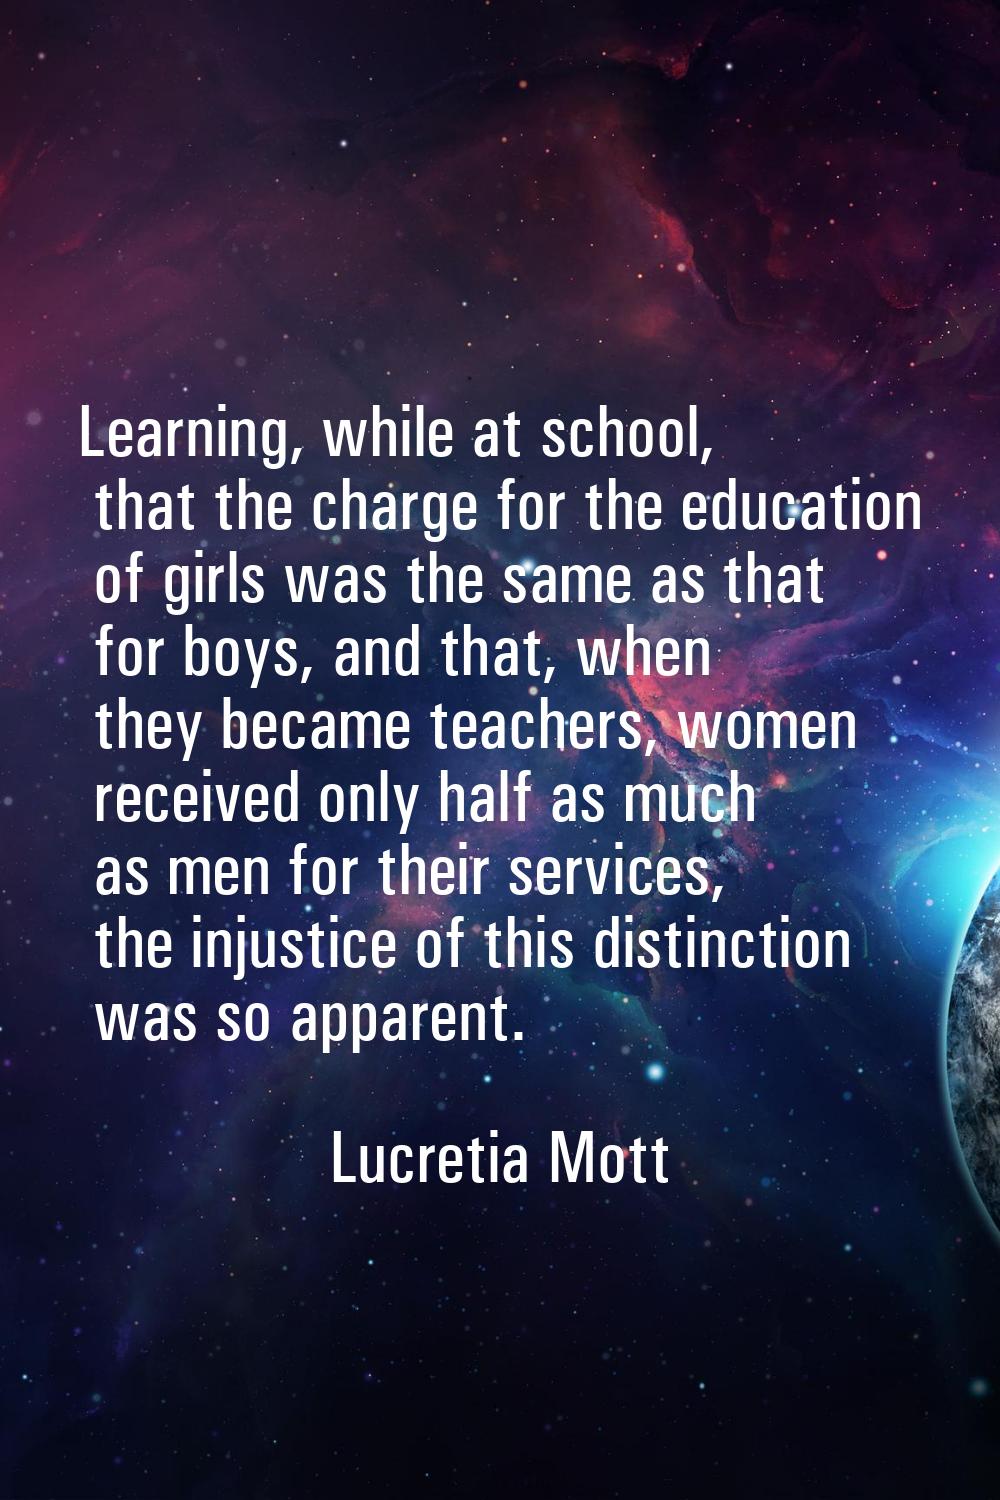 Learning, while at school, that the charge for the education of girls was the same as that for boys